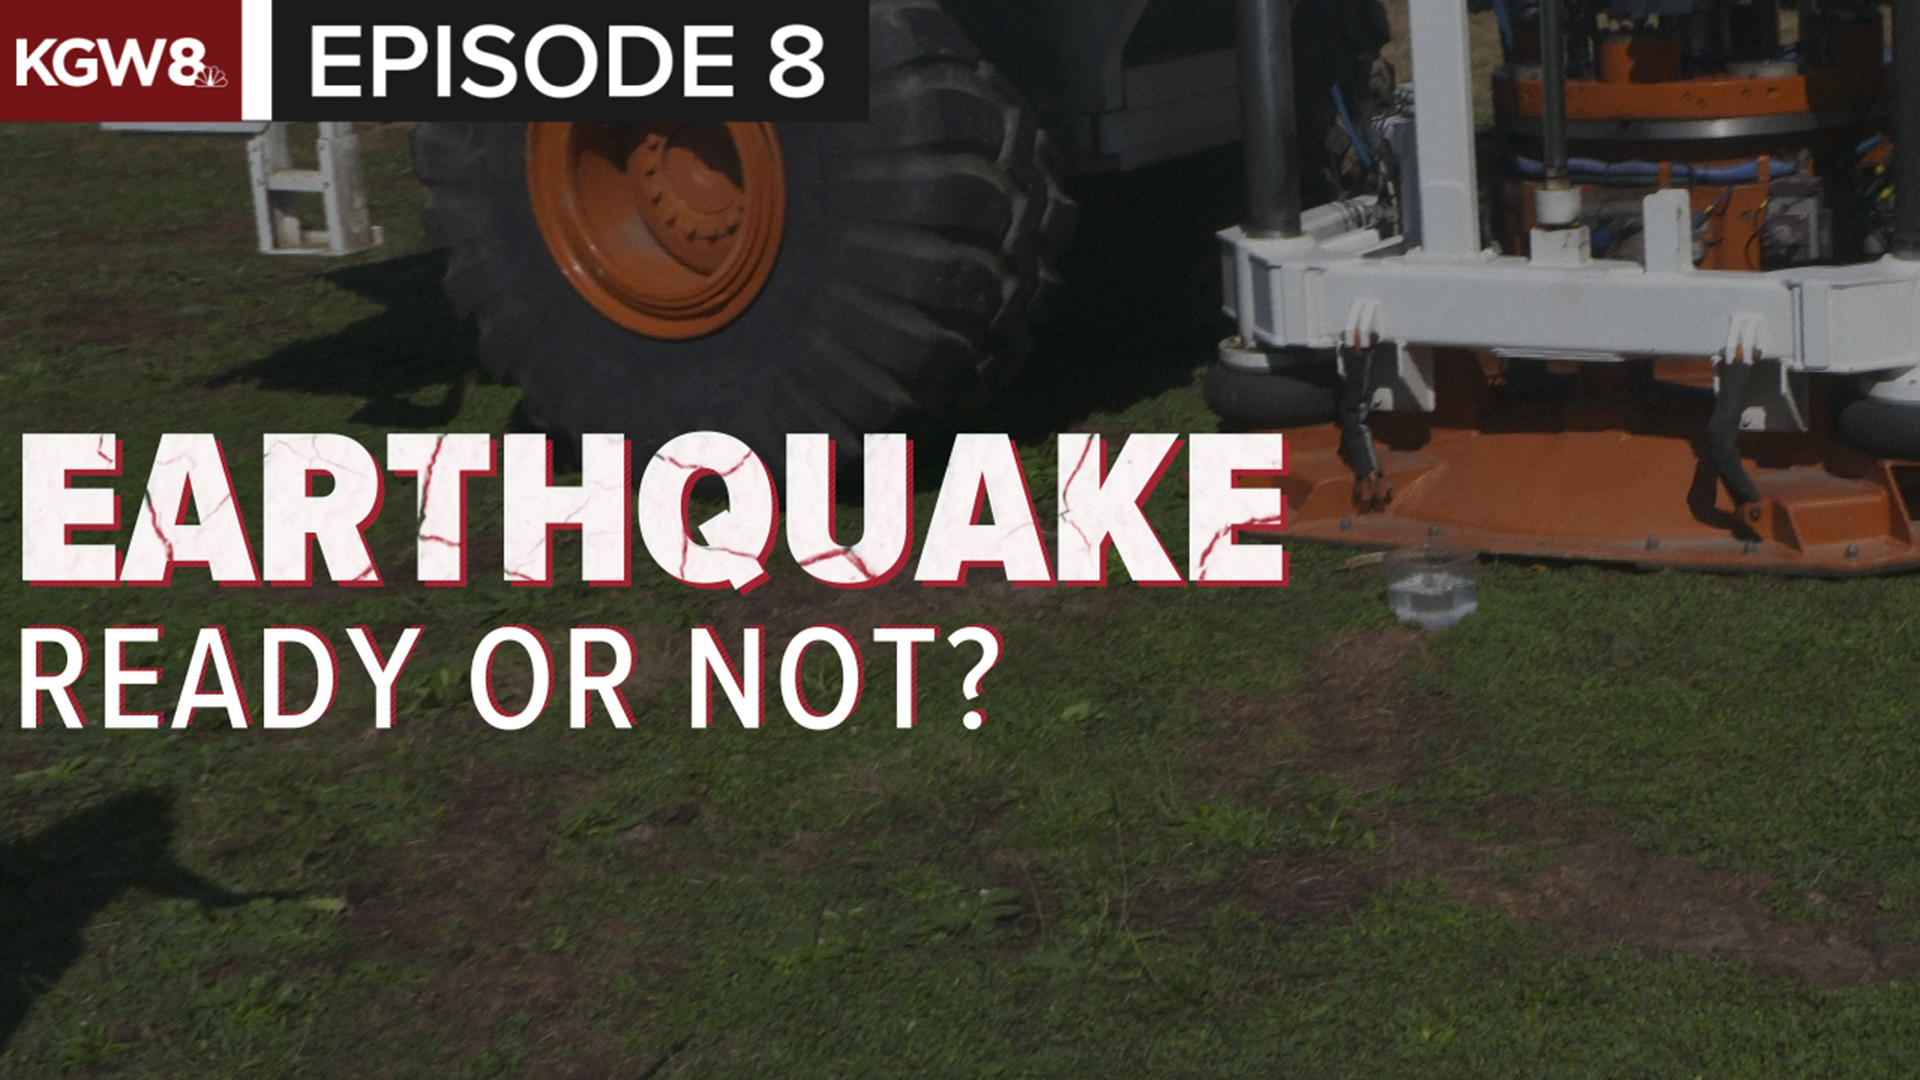 Anywhere you have loose soils or sands that are saturated, and a risk of earthquakes, you have the risk of liquefaction.